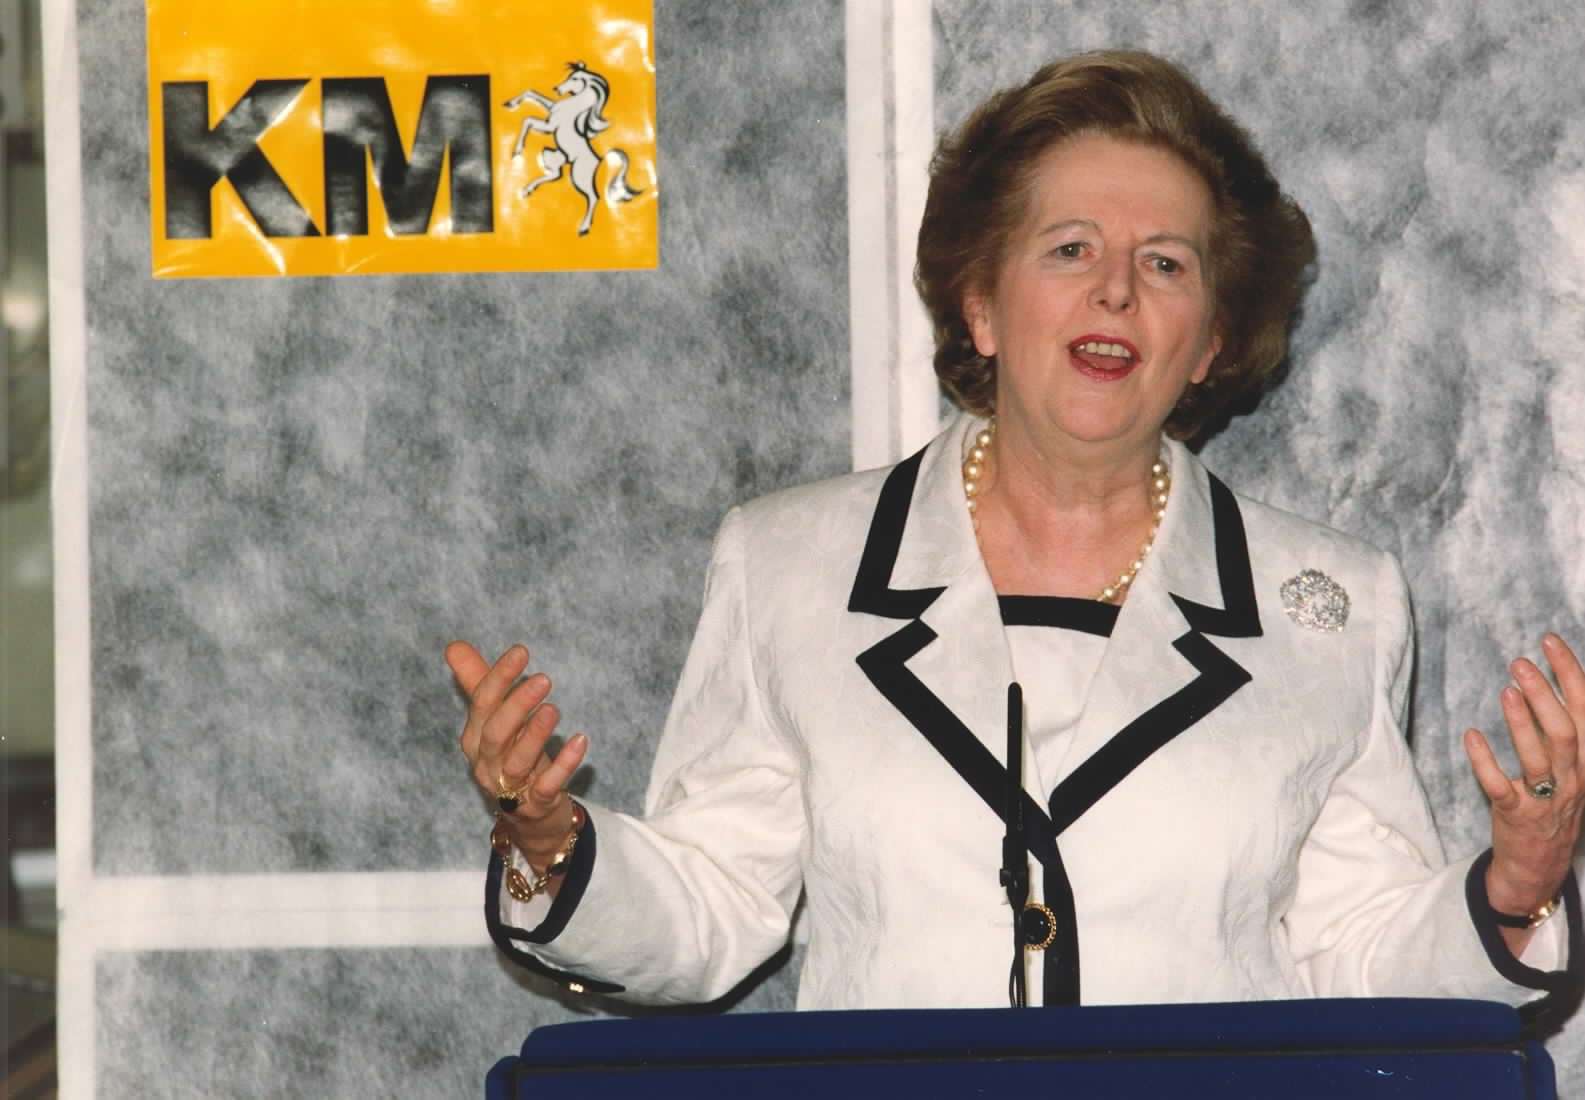 Margaret Thatcher spent all the 1980s in Downing Street - but to say she was something of a Marmite politician would be a bit of an understatement